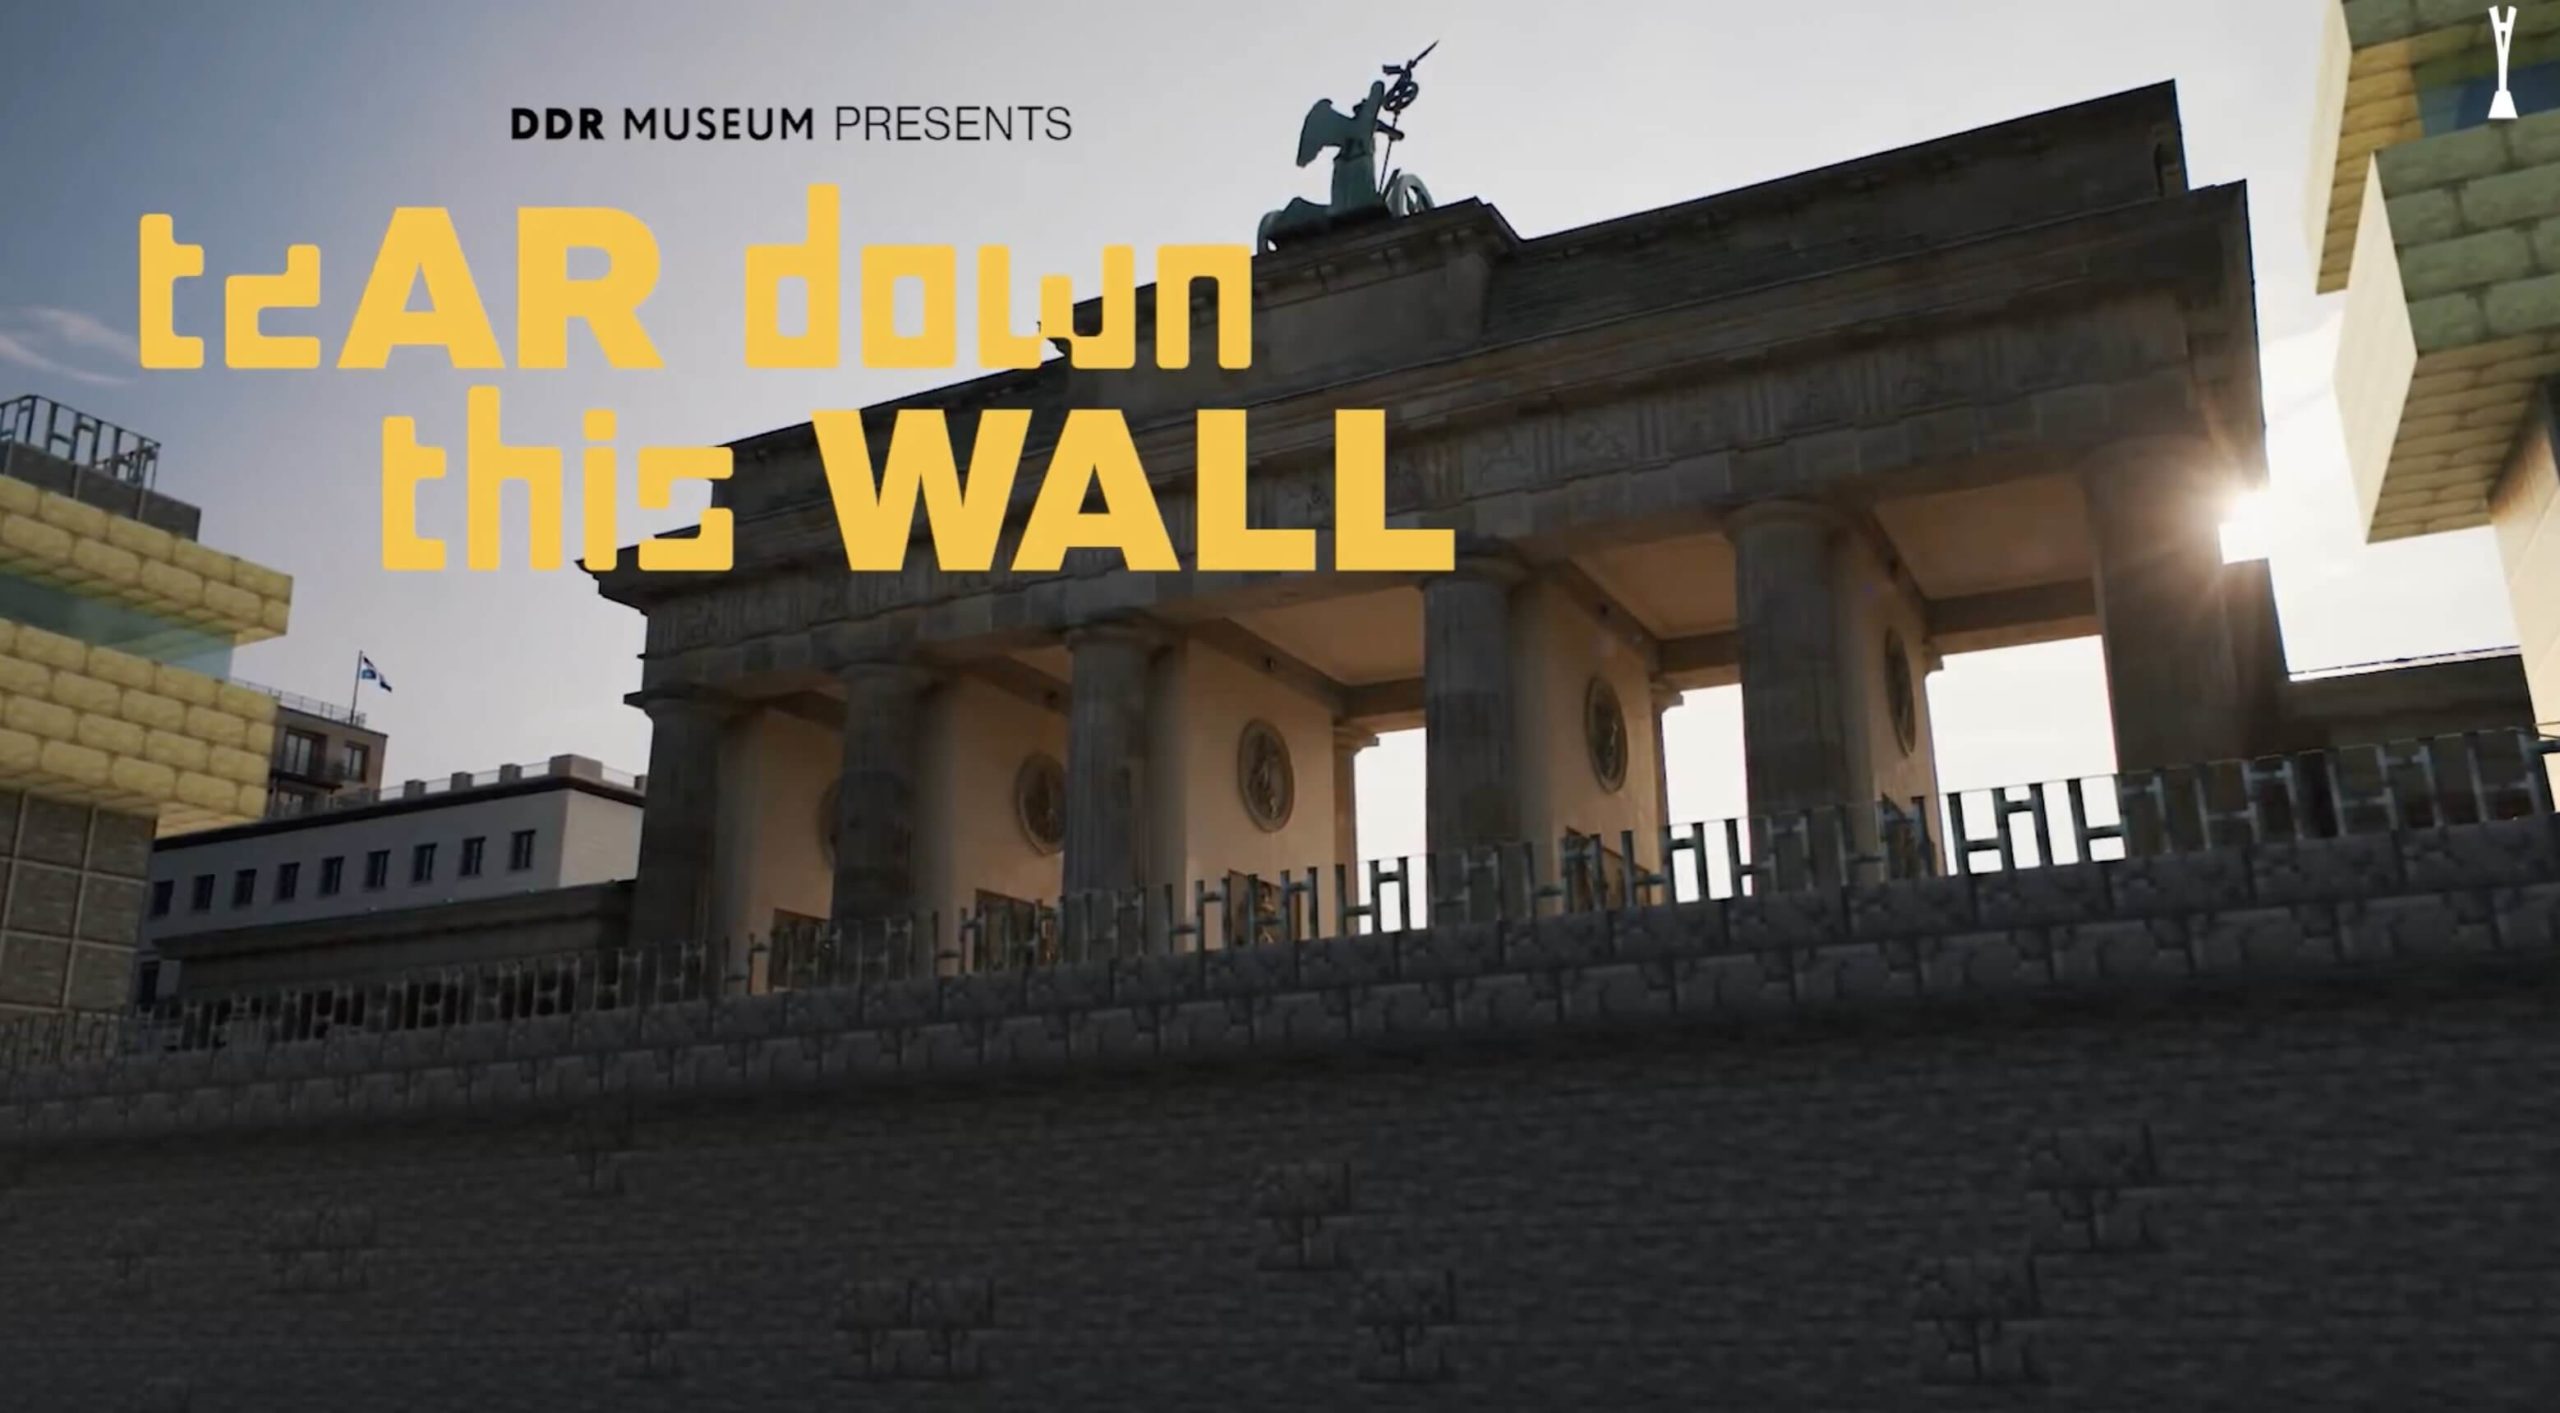 DDR Museum: teAR down this WALL